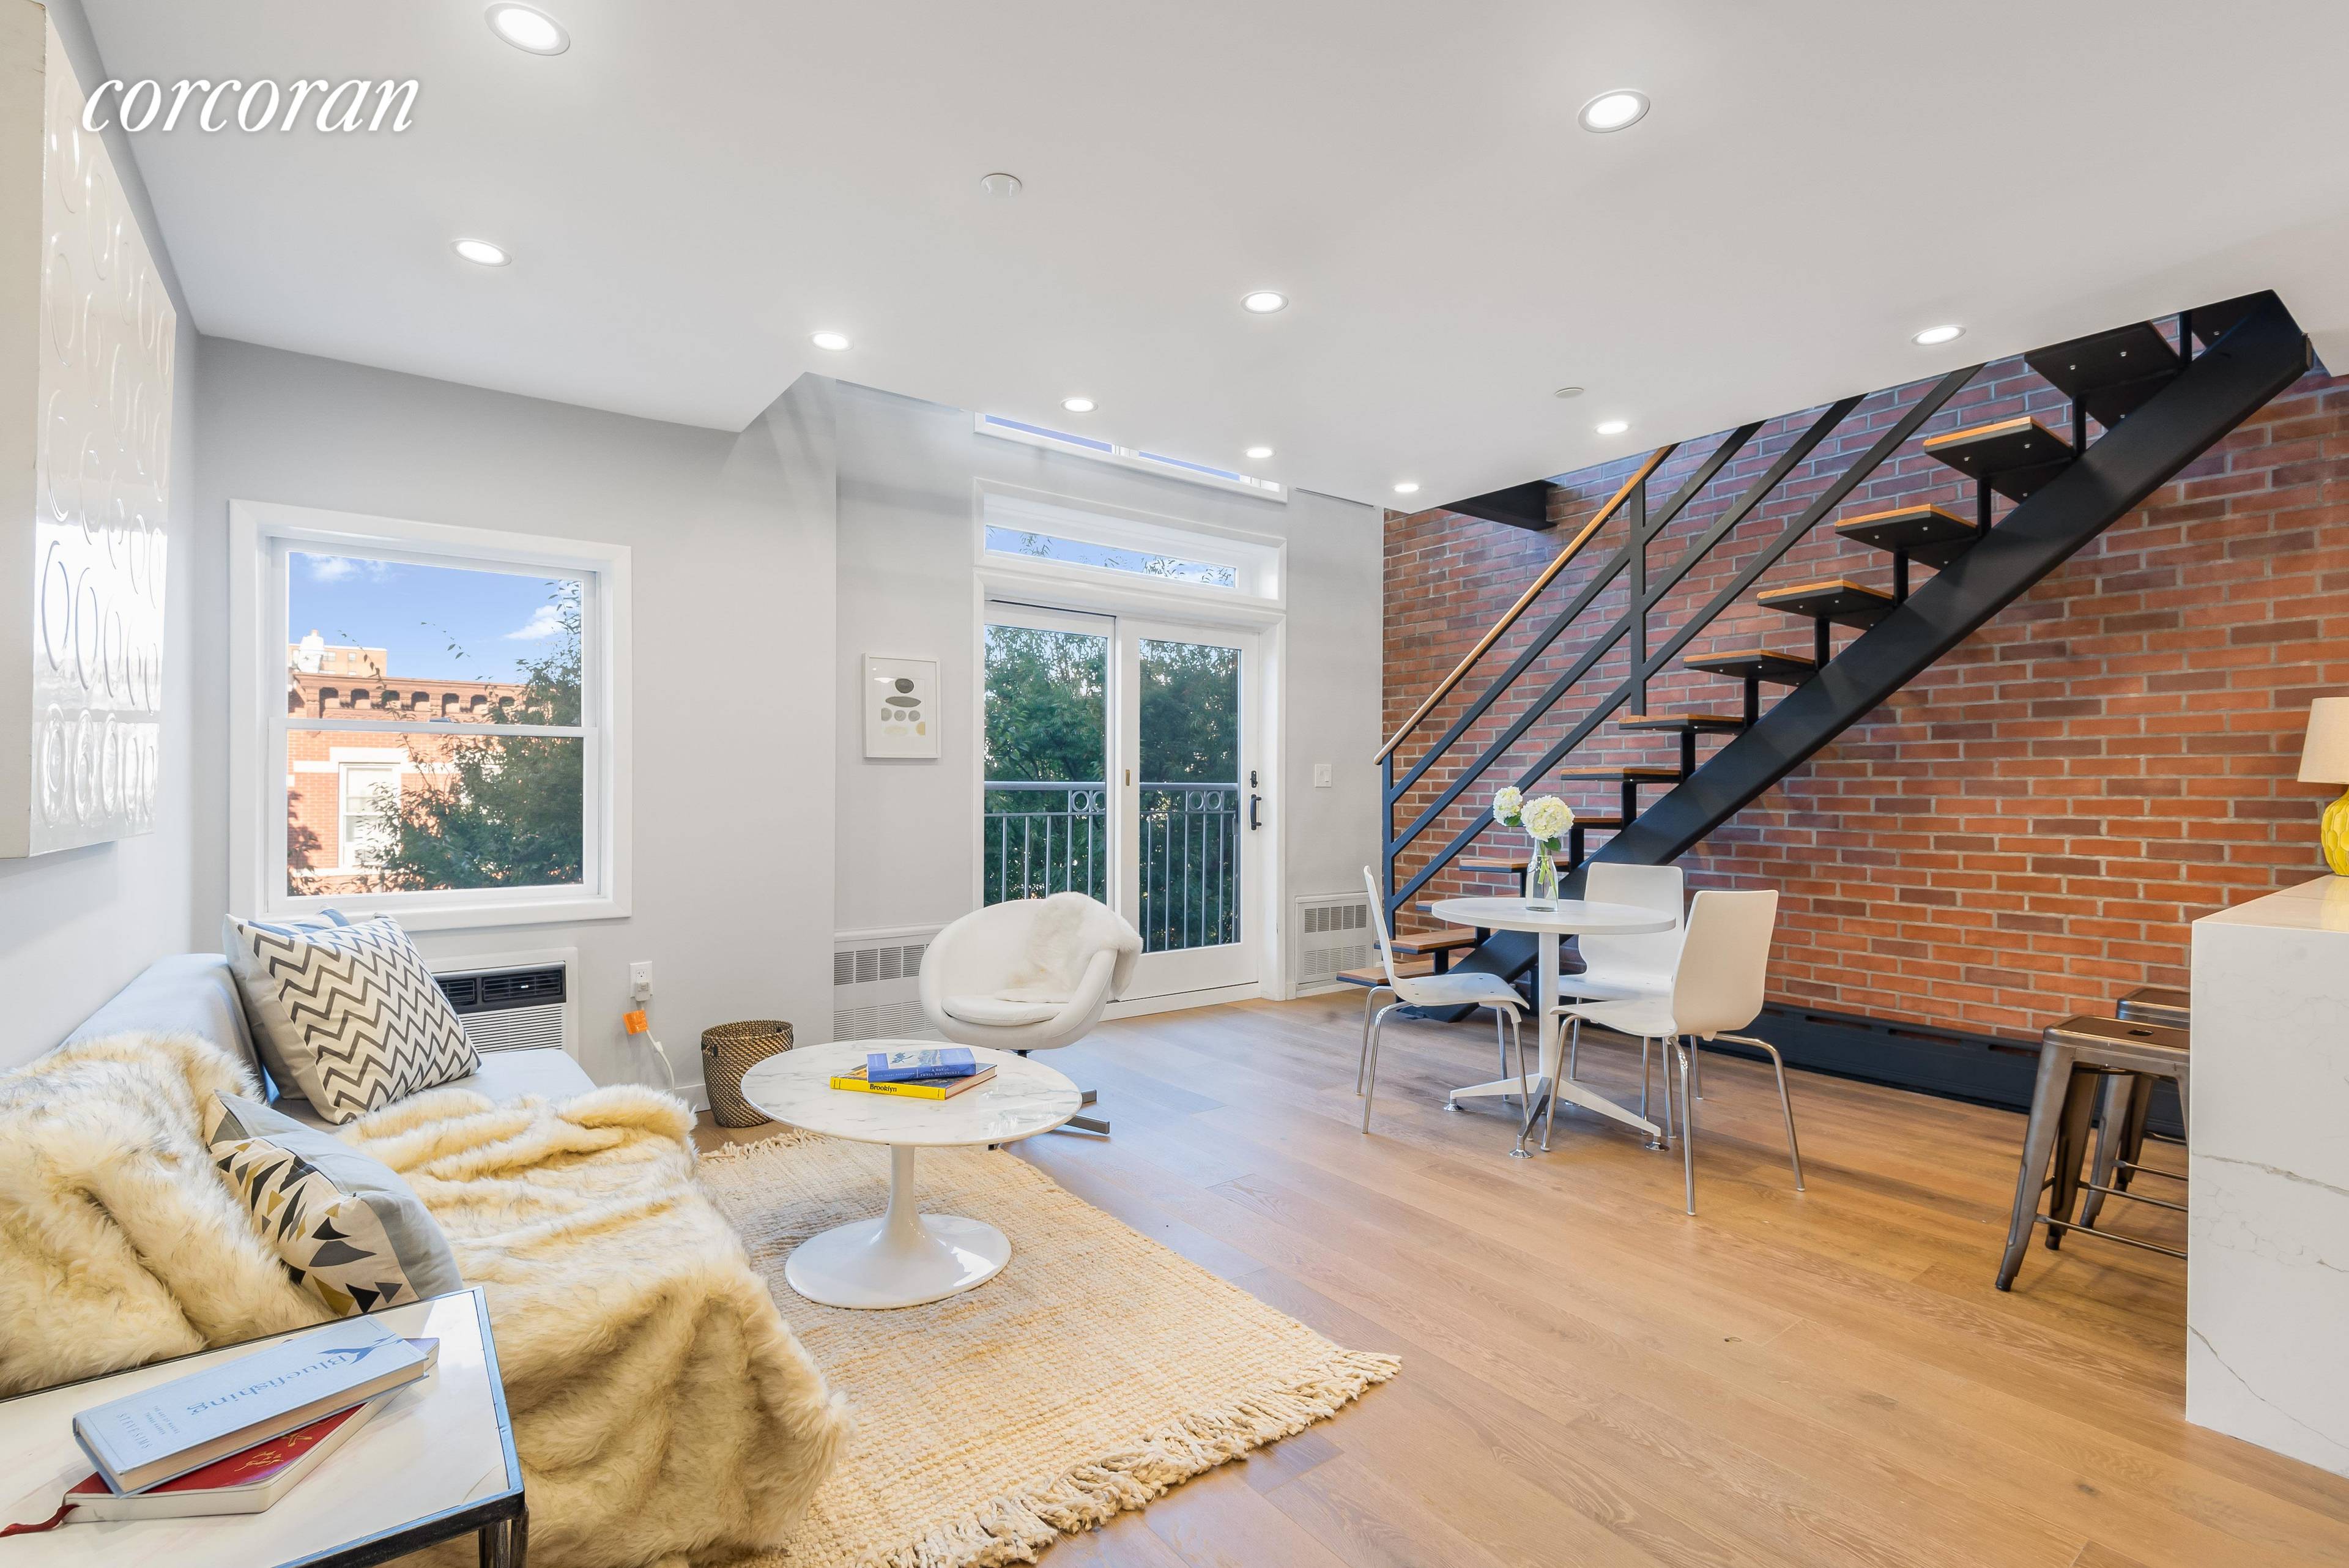 New to the market. 270 12th St is a brand new boutique condominium in Park Slope.